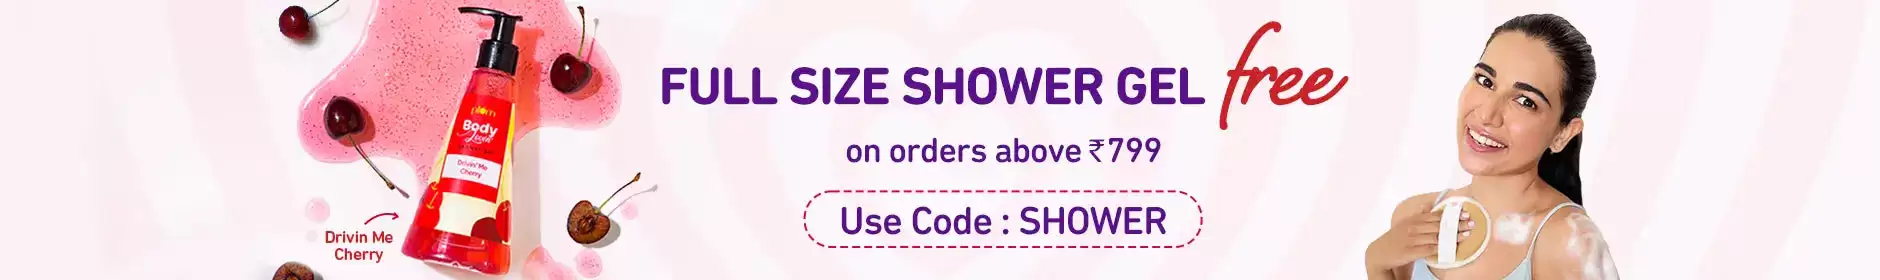 Get Free Shower Gel On Orders Of Rs.799 At Plumgoodness.com